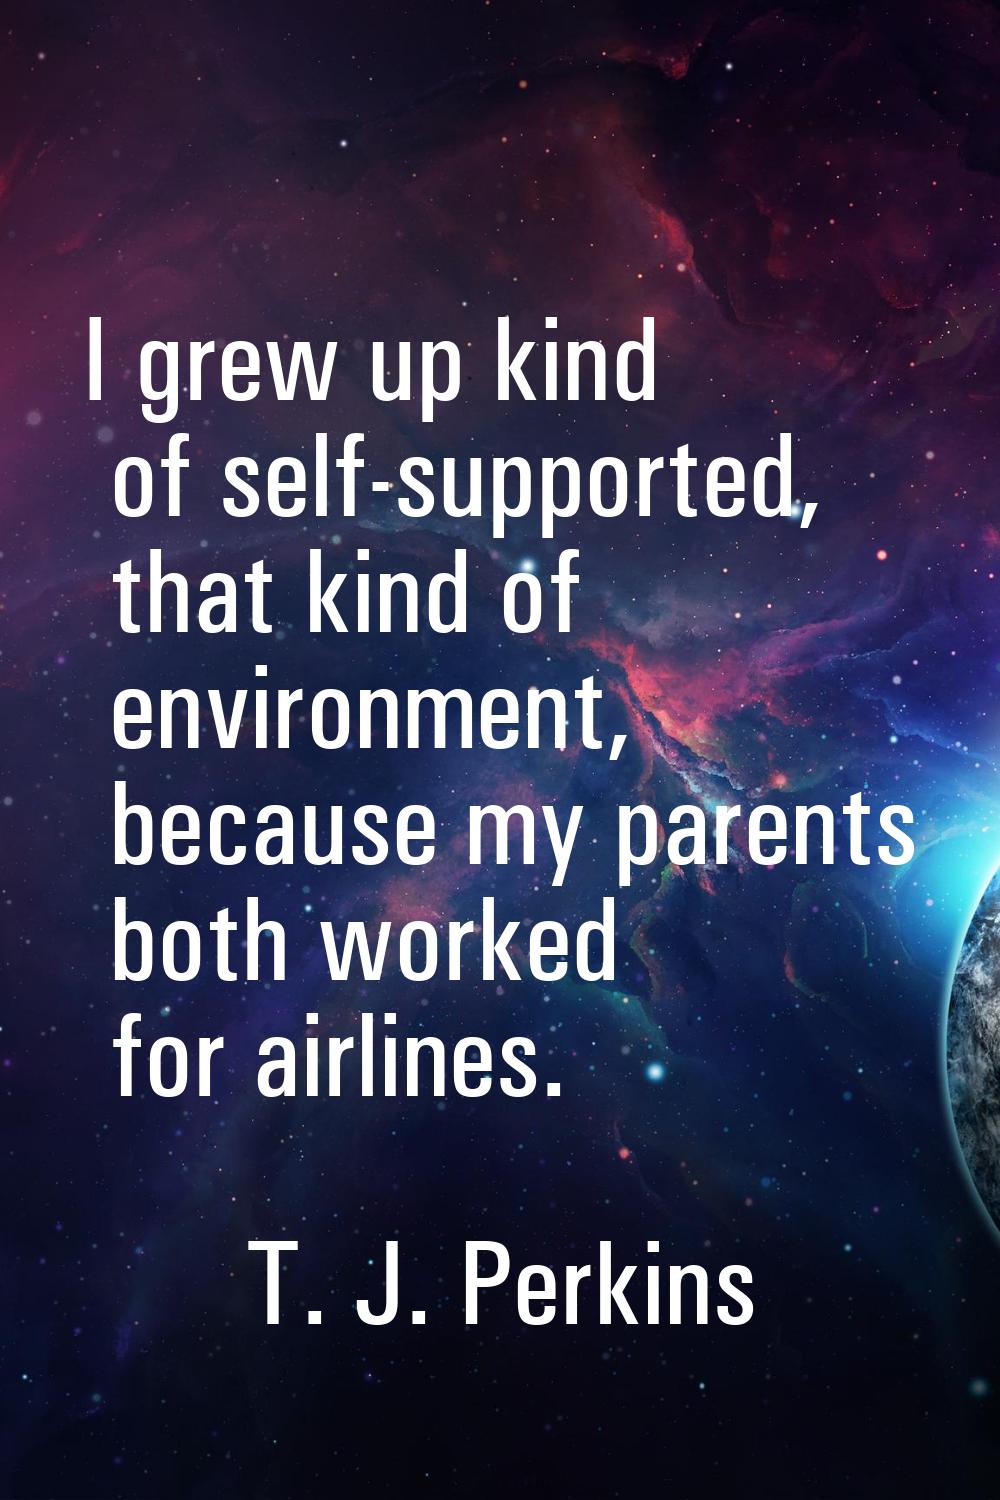 I grew up kind of self-supported, that kind of environment, because my parents both worked for airl